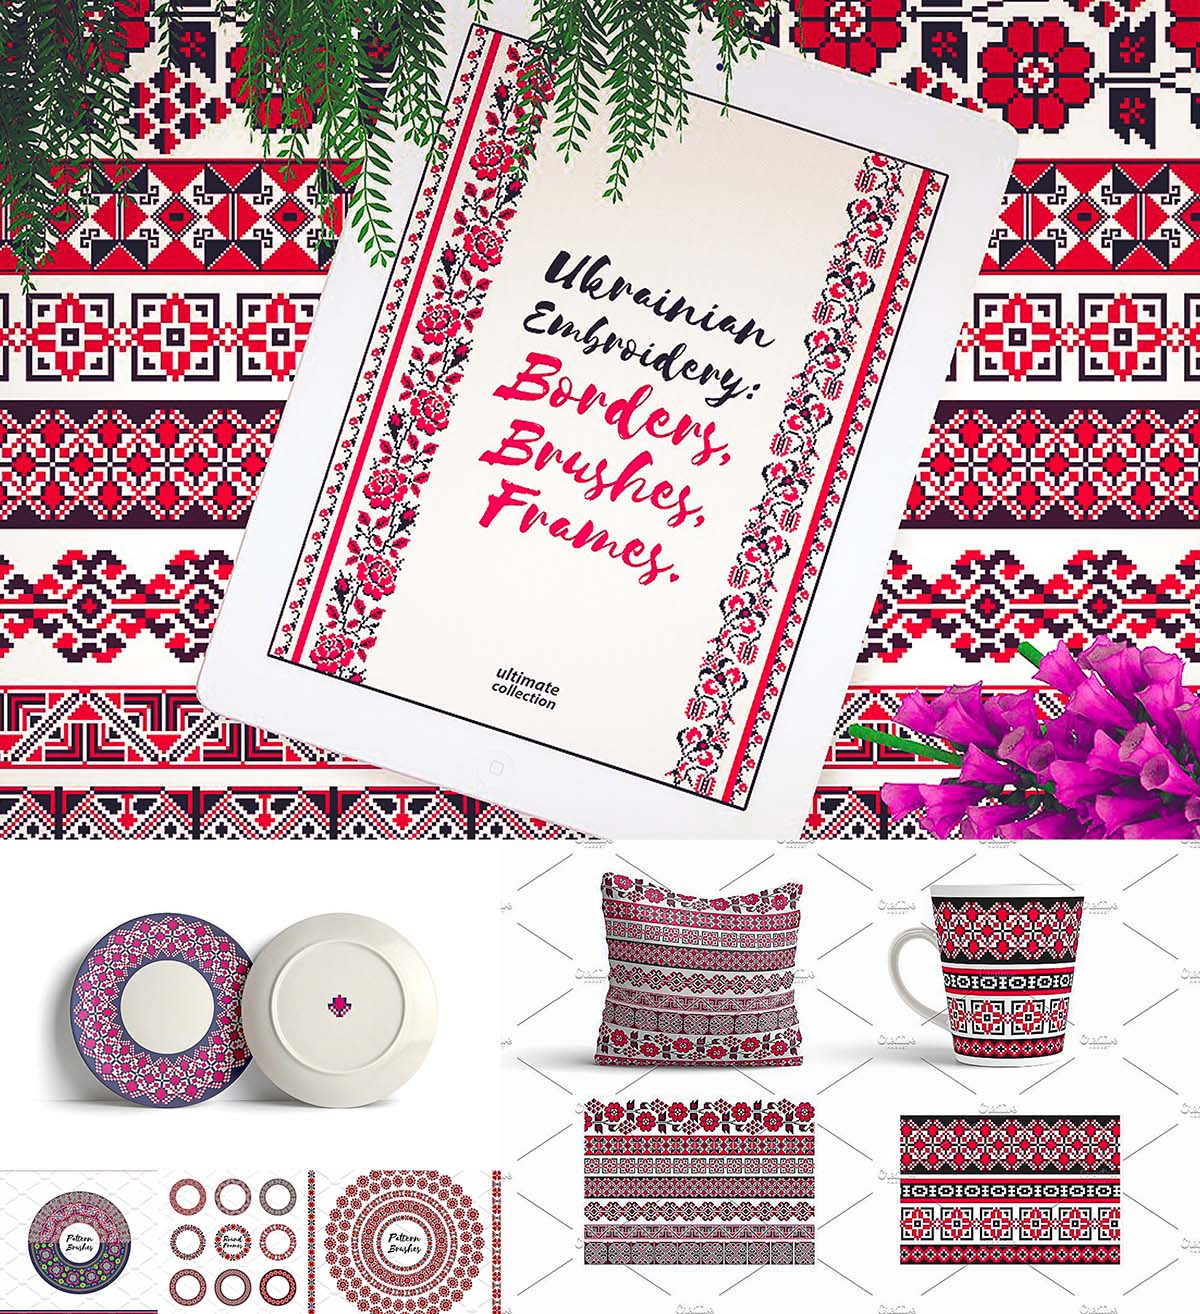 Ukrainian embrodiery patterns and brushes